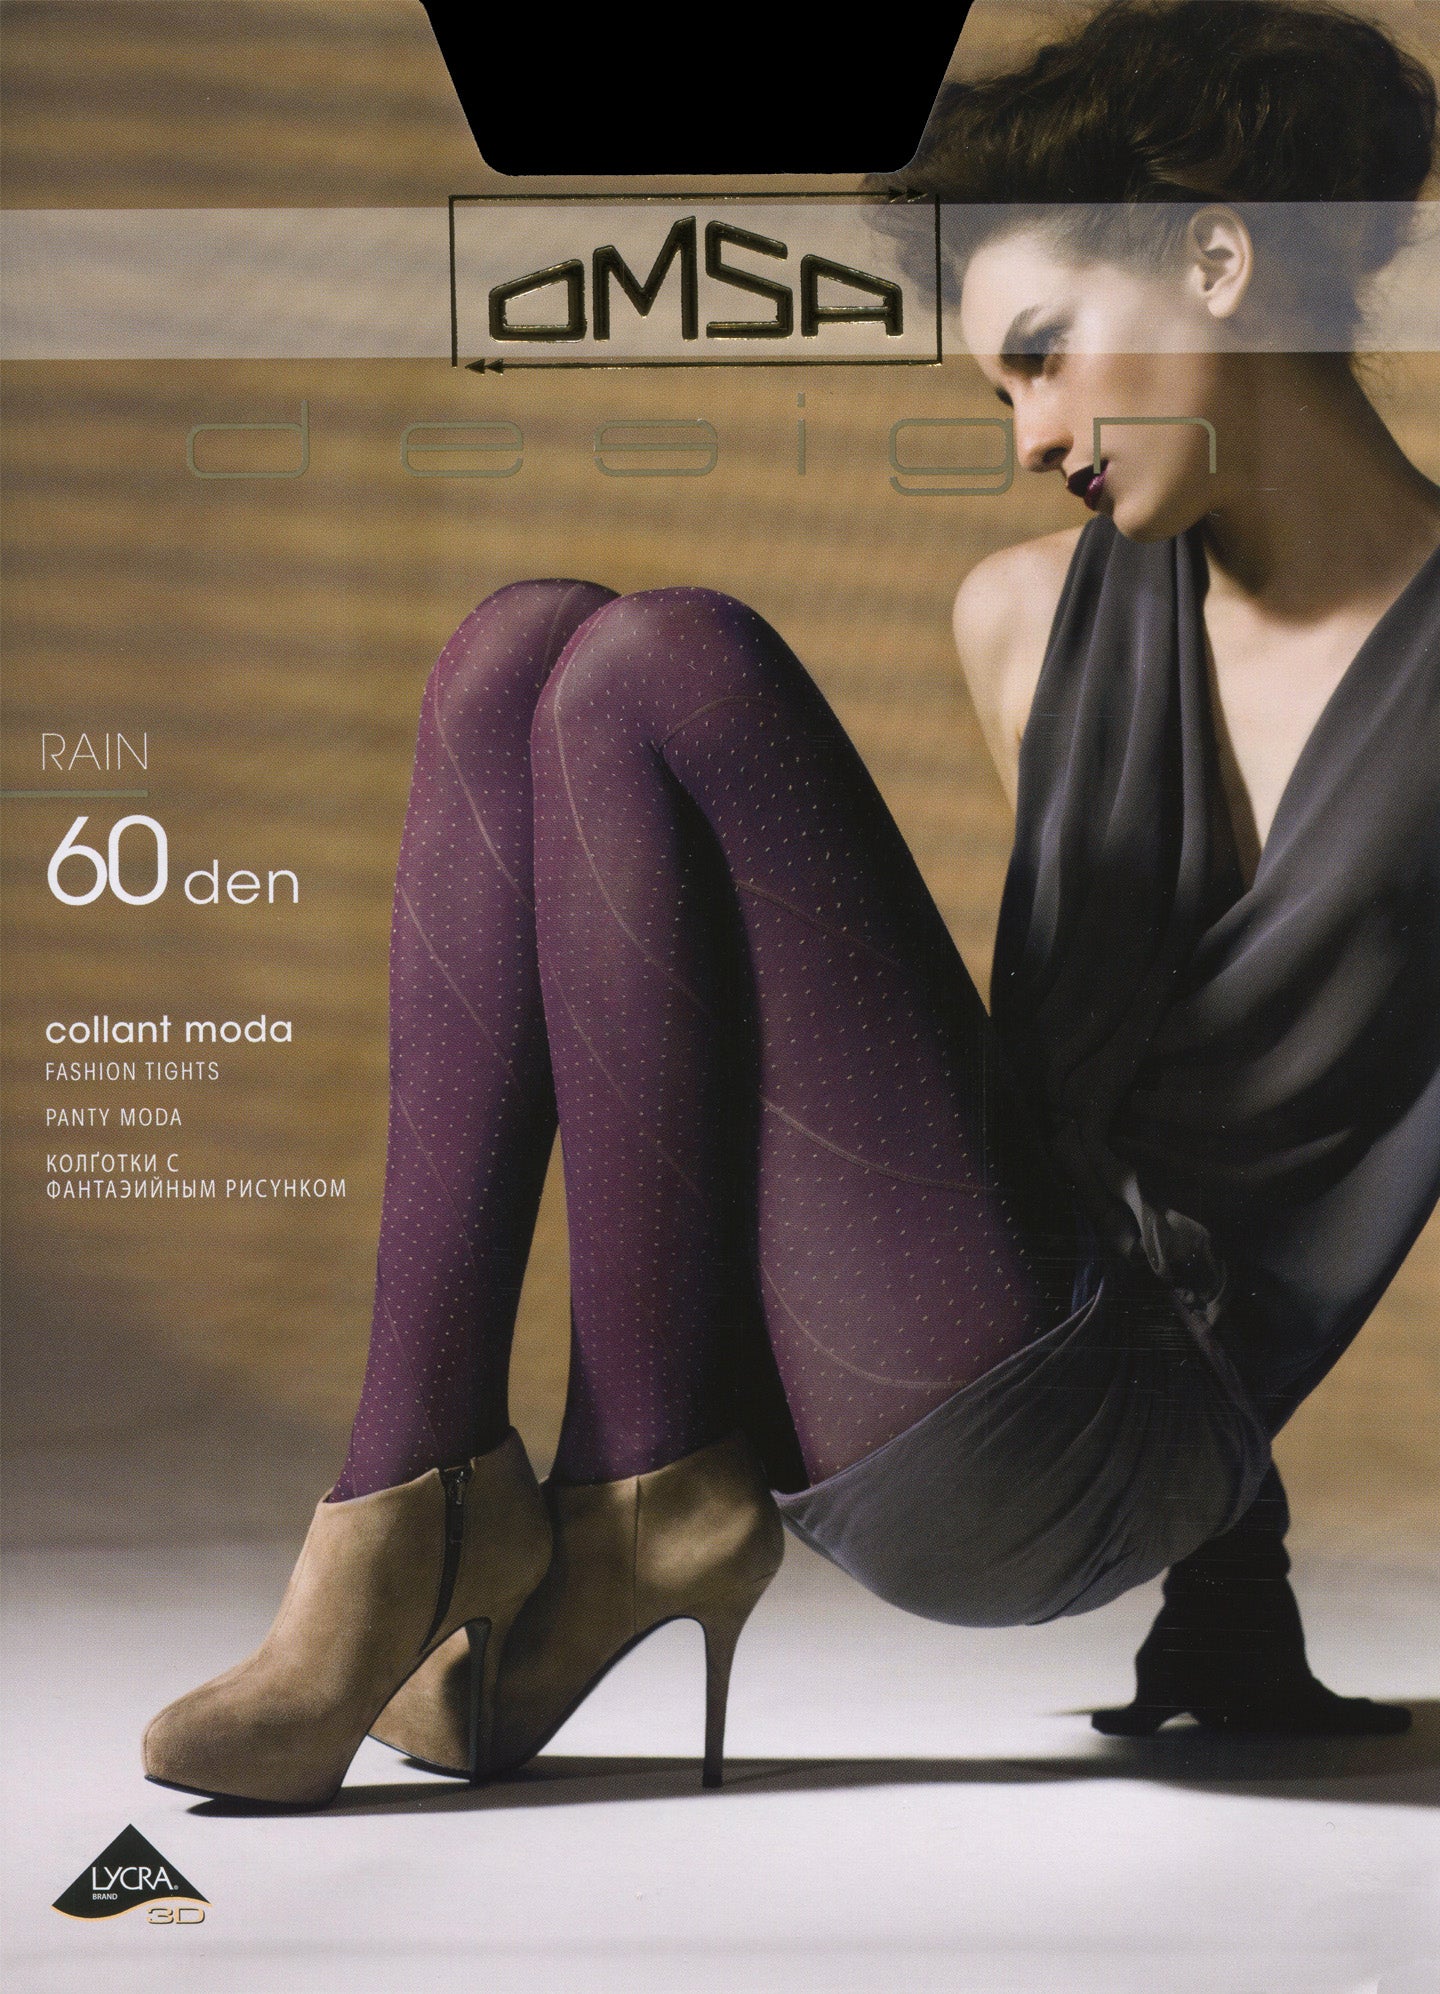 Omsa 3227 Rain Collant - opaque fashion tights with a beige spot and swirl pattern, available in purple, black and navy